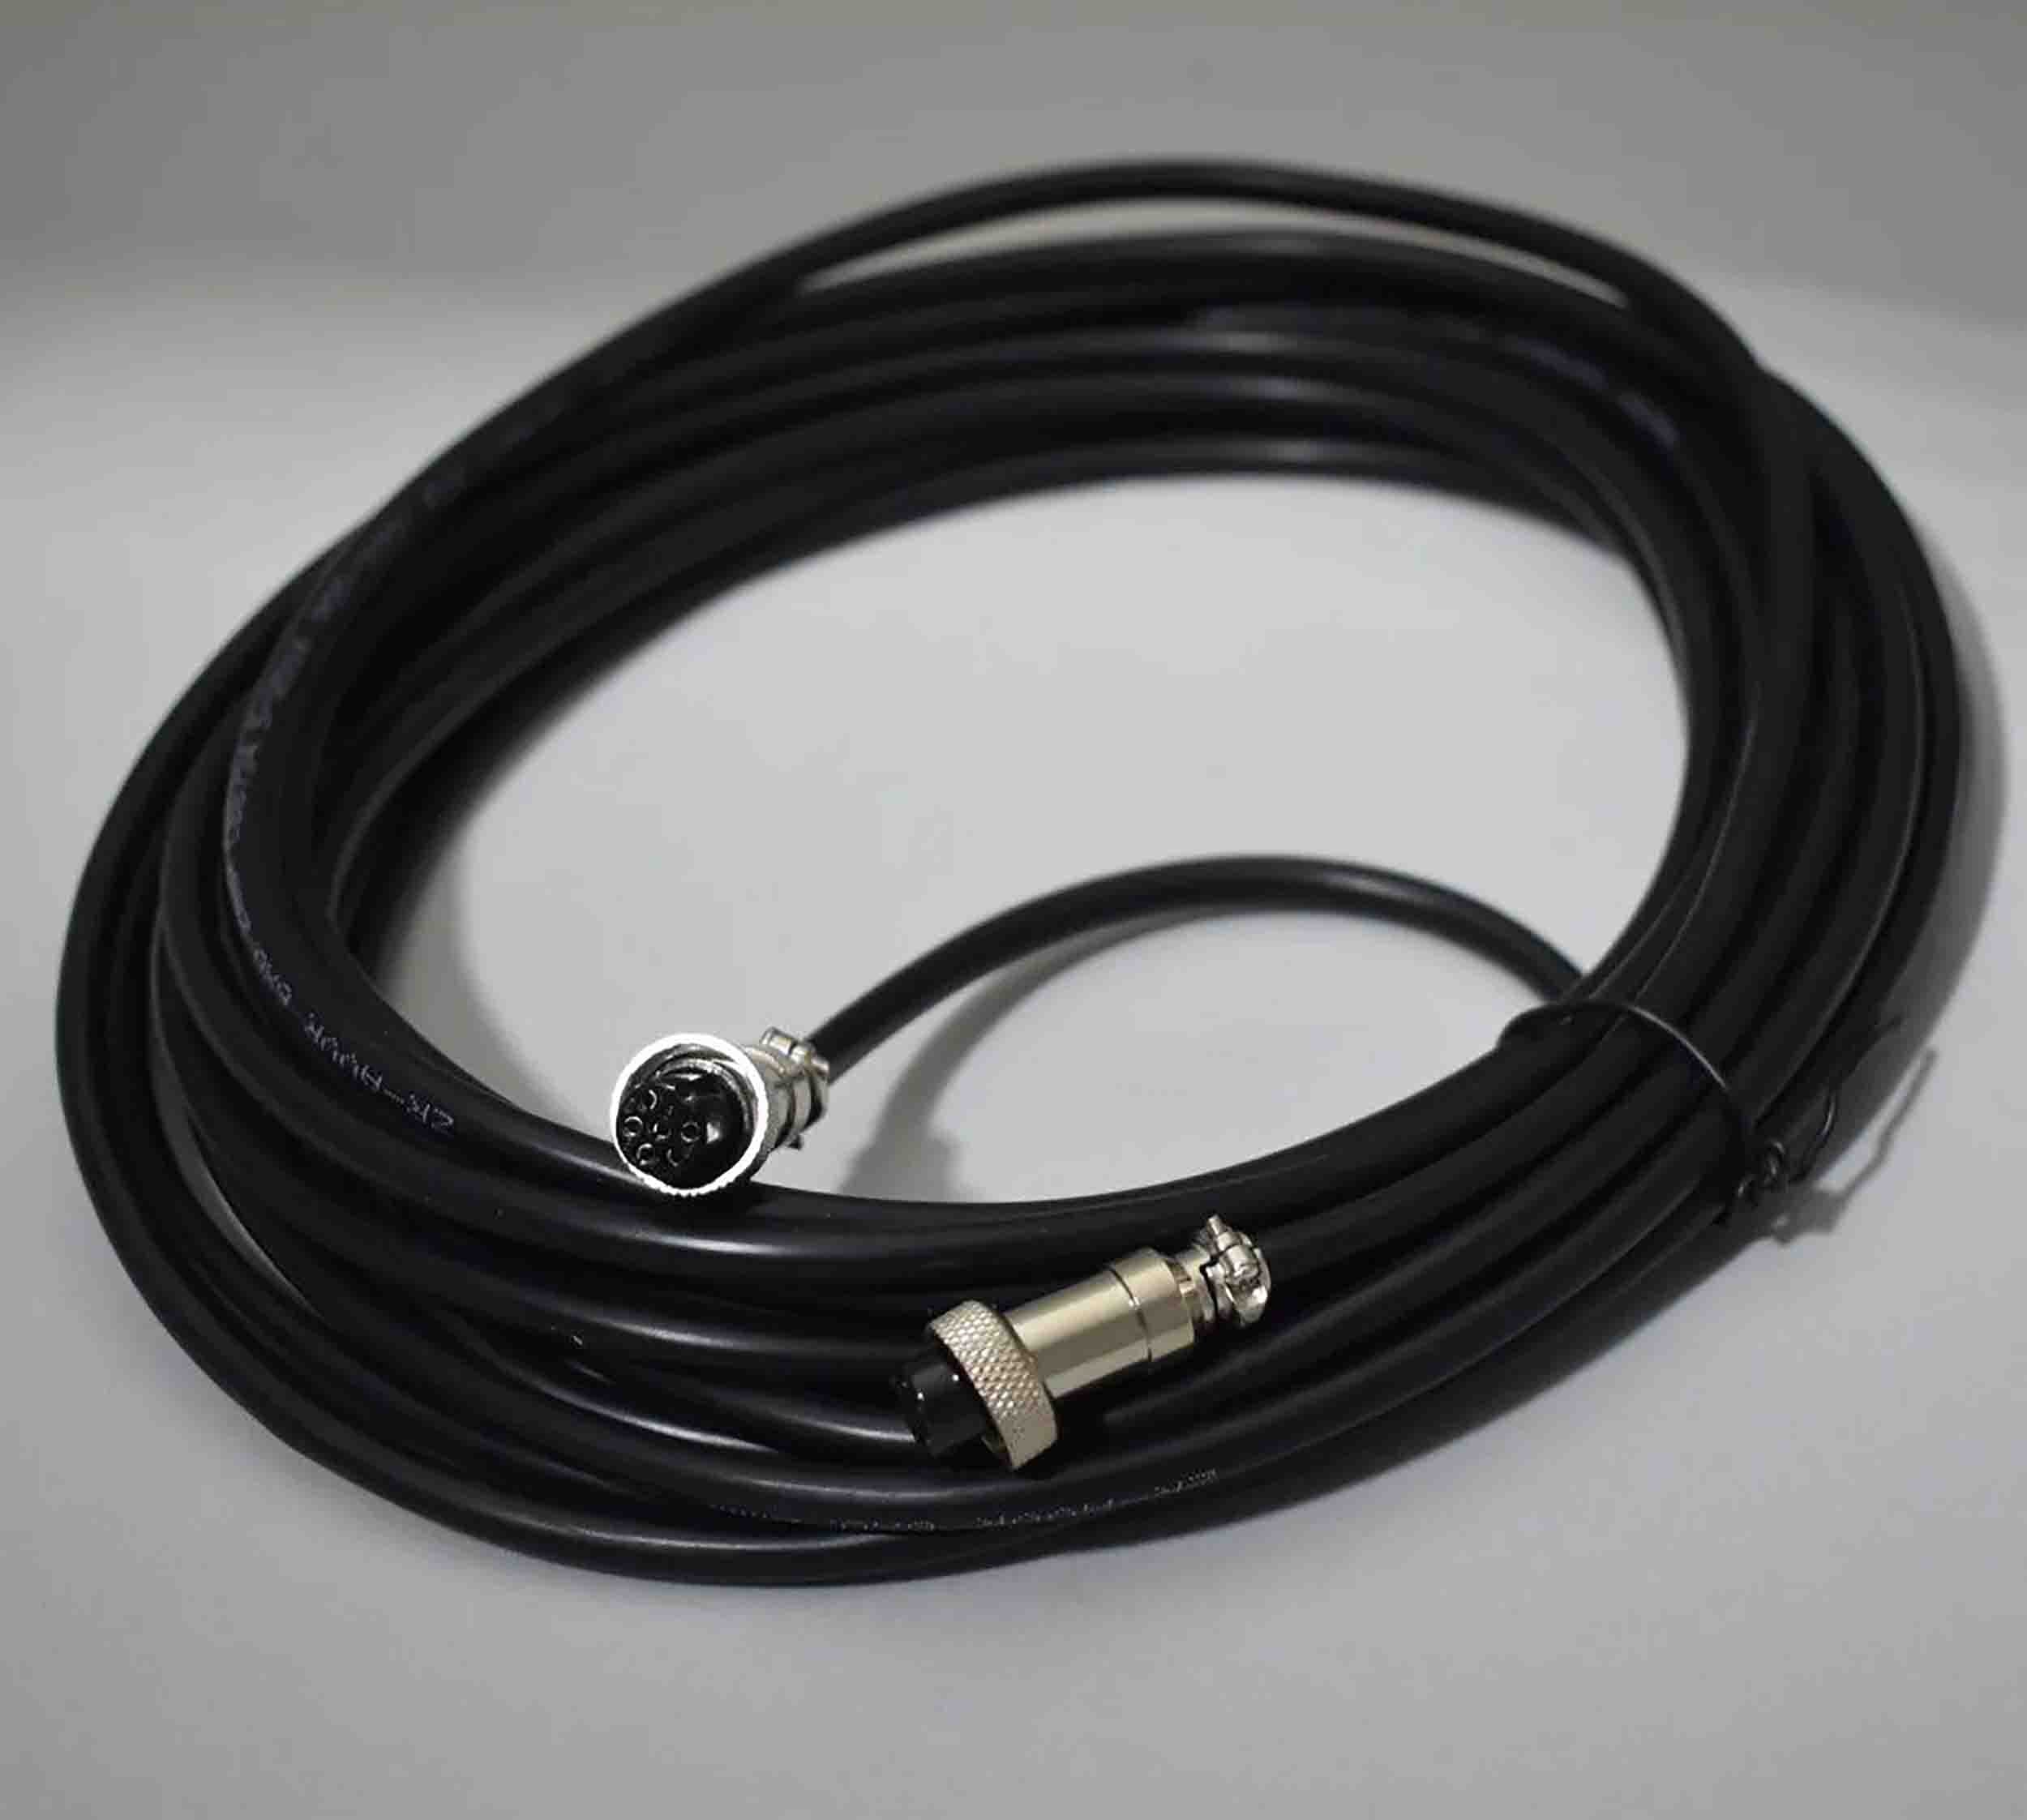 X-Laser 100-356 E-Stop Cable for LaserCube Models - 3 Ft - Hollywood DJ